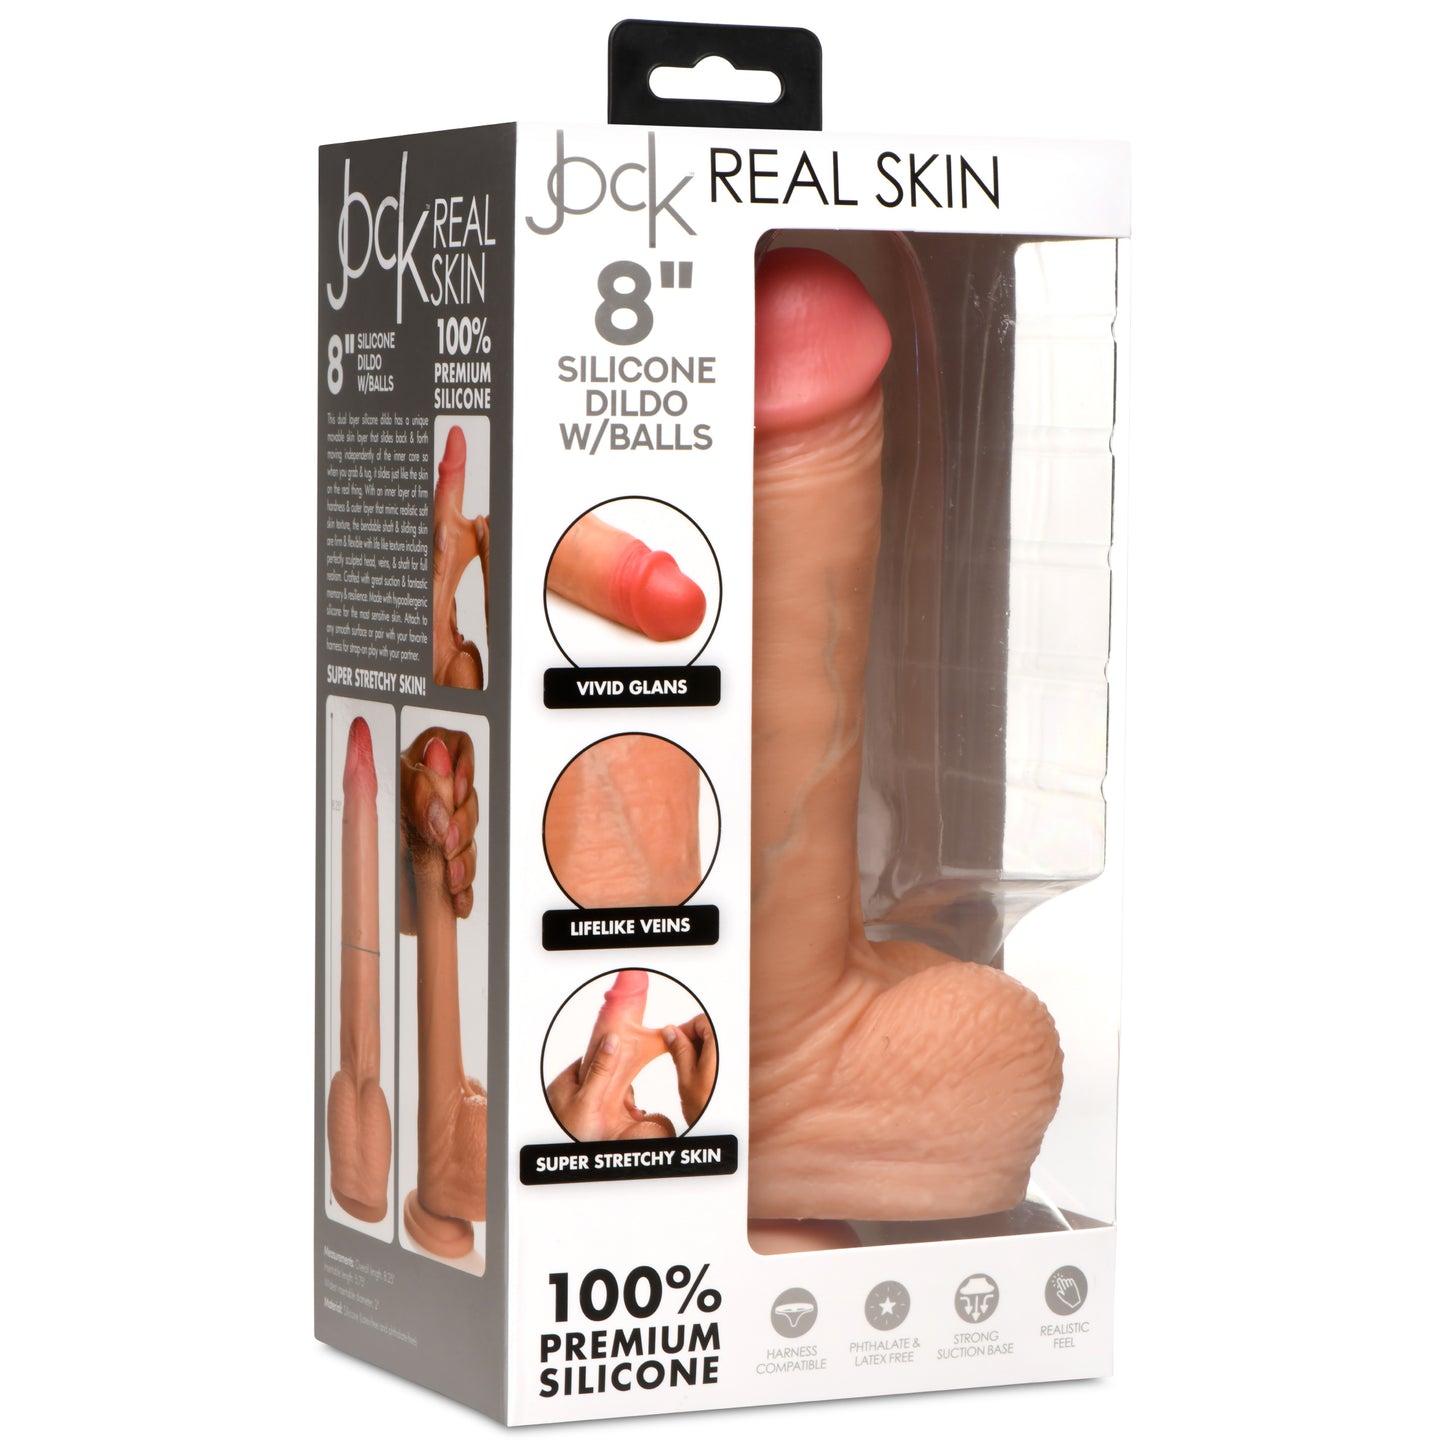 Real Skin Silicone Dildo with Balls - 8 Inch